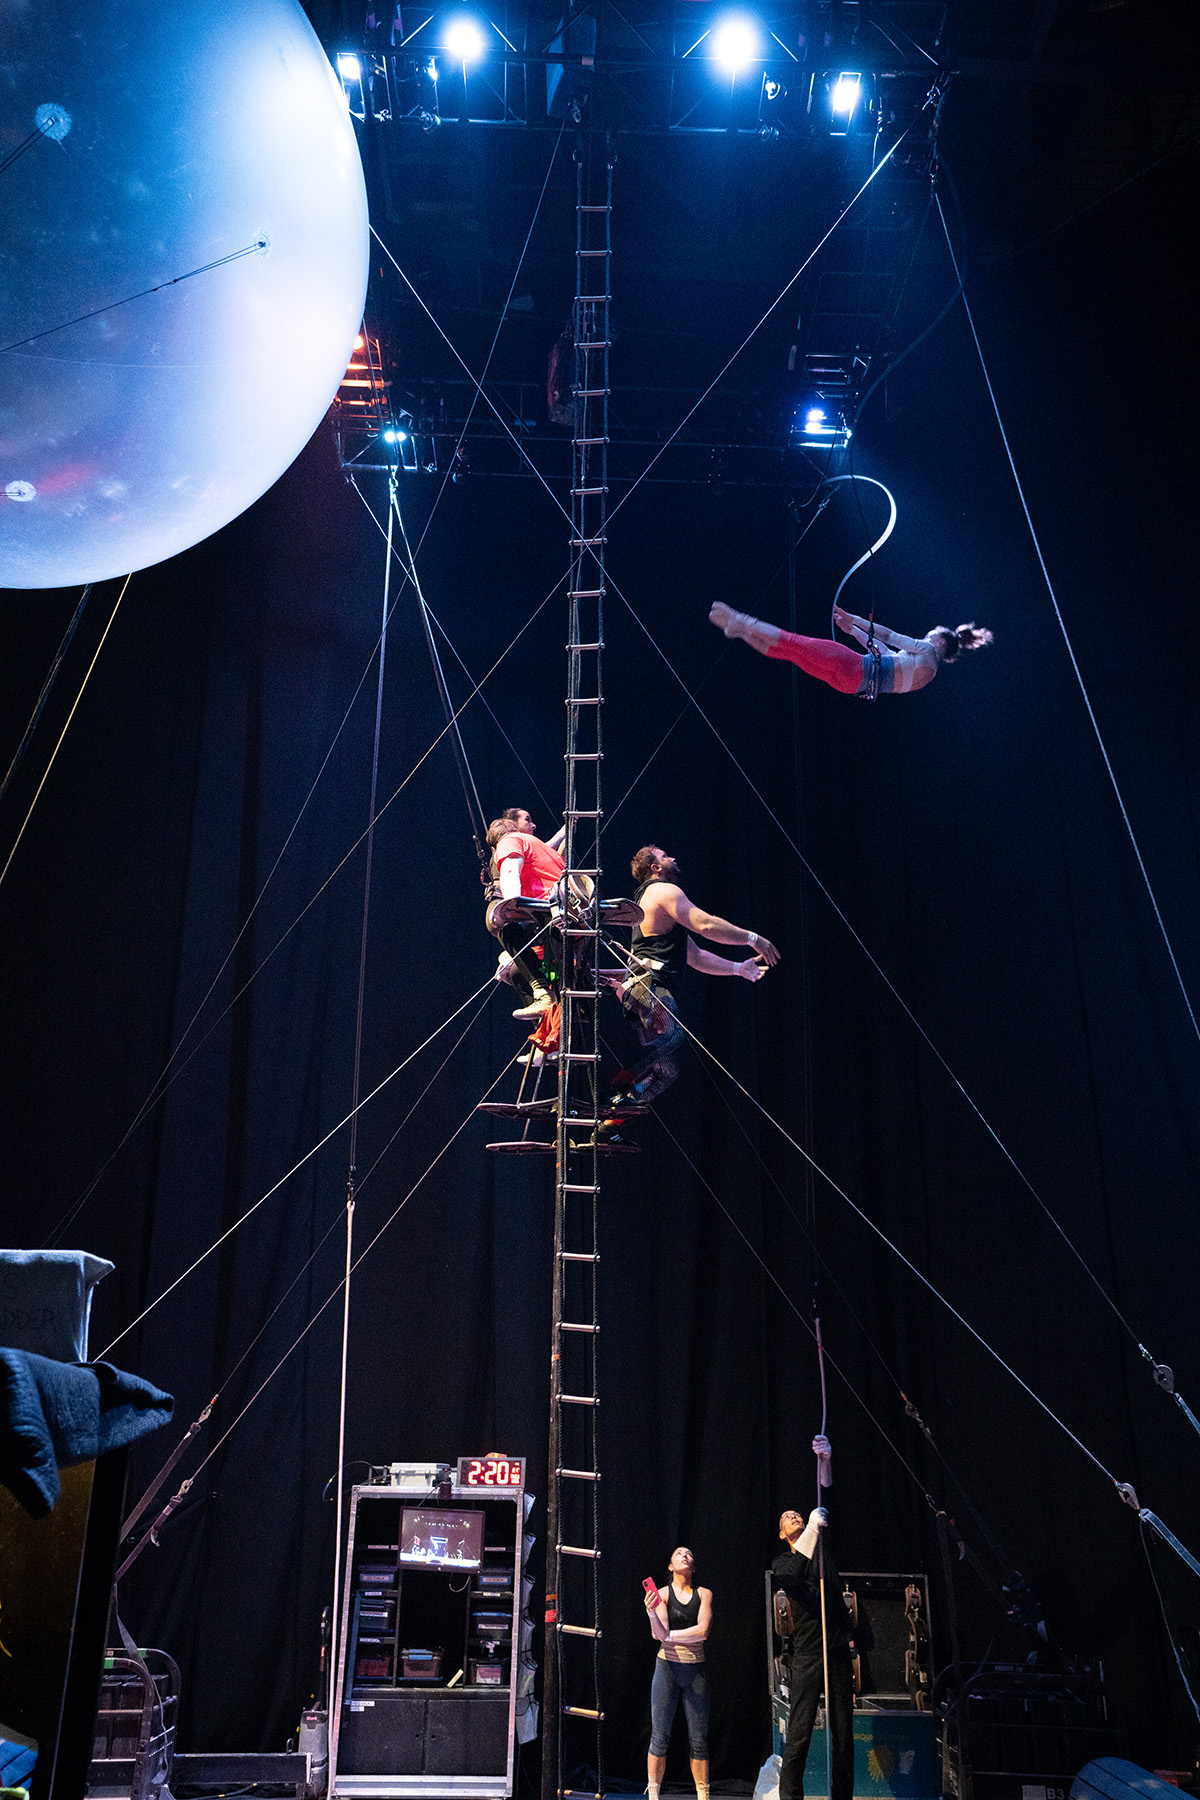 Cirque du Soleil: Corteo came to the Blue FCU Arena in Loveland, CO this January. (Photos: Fred Garcia @phredgee)